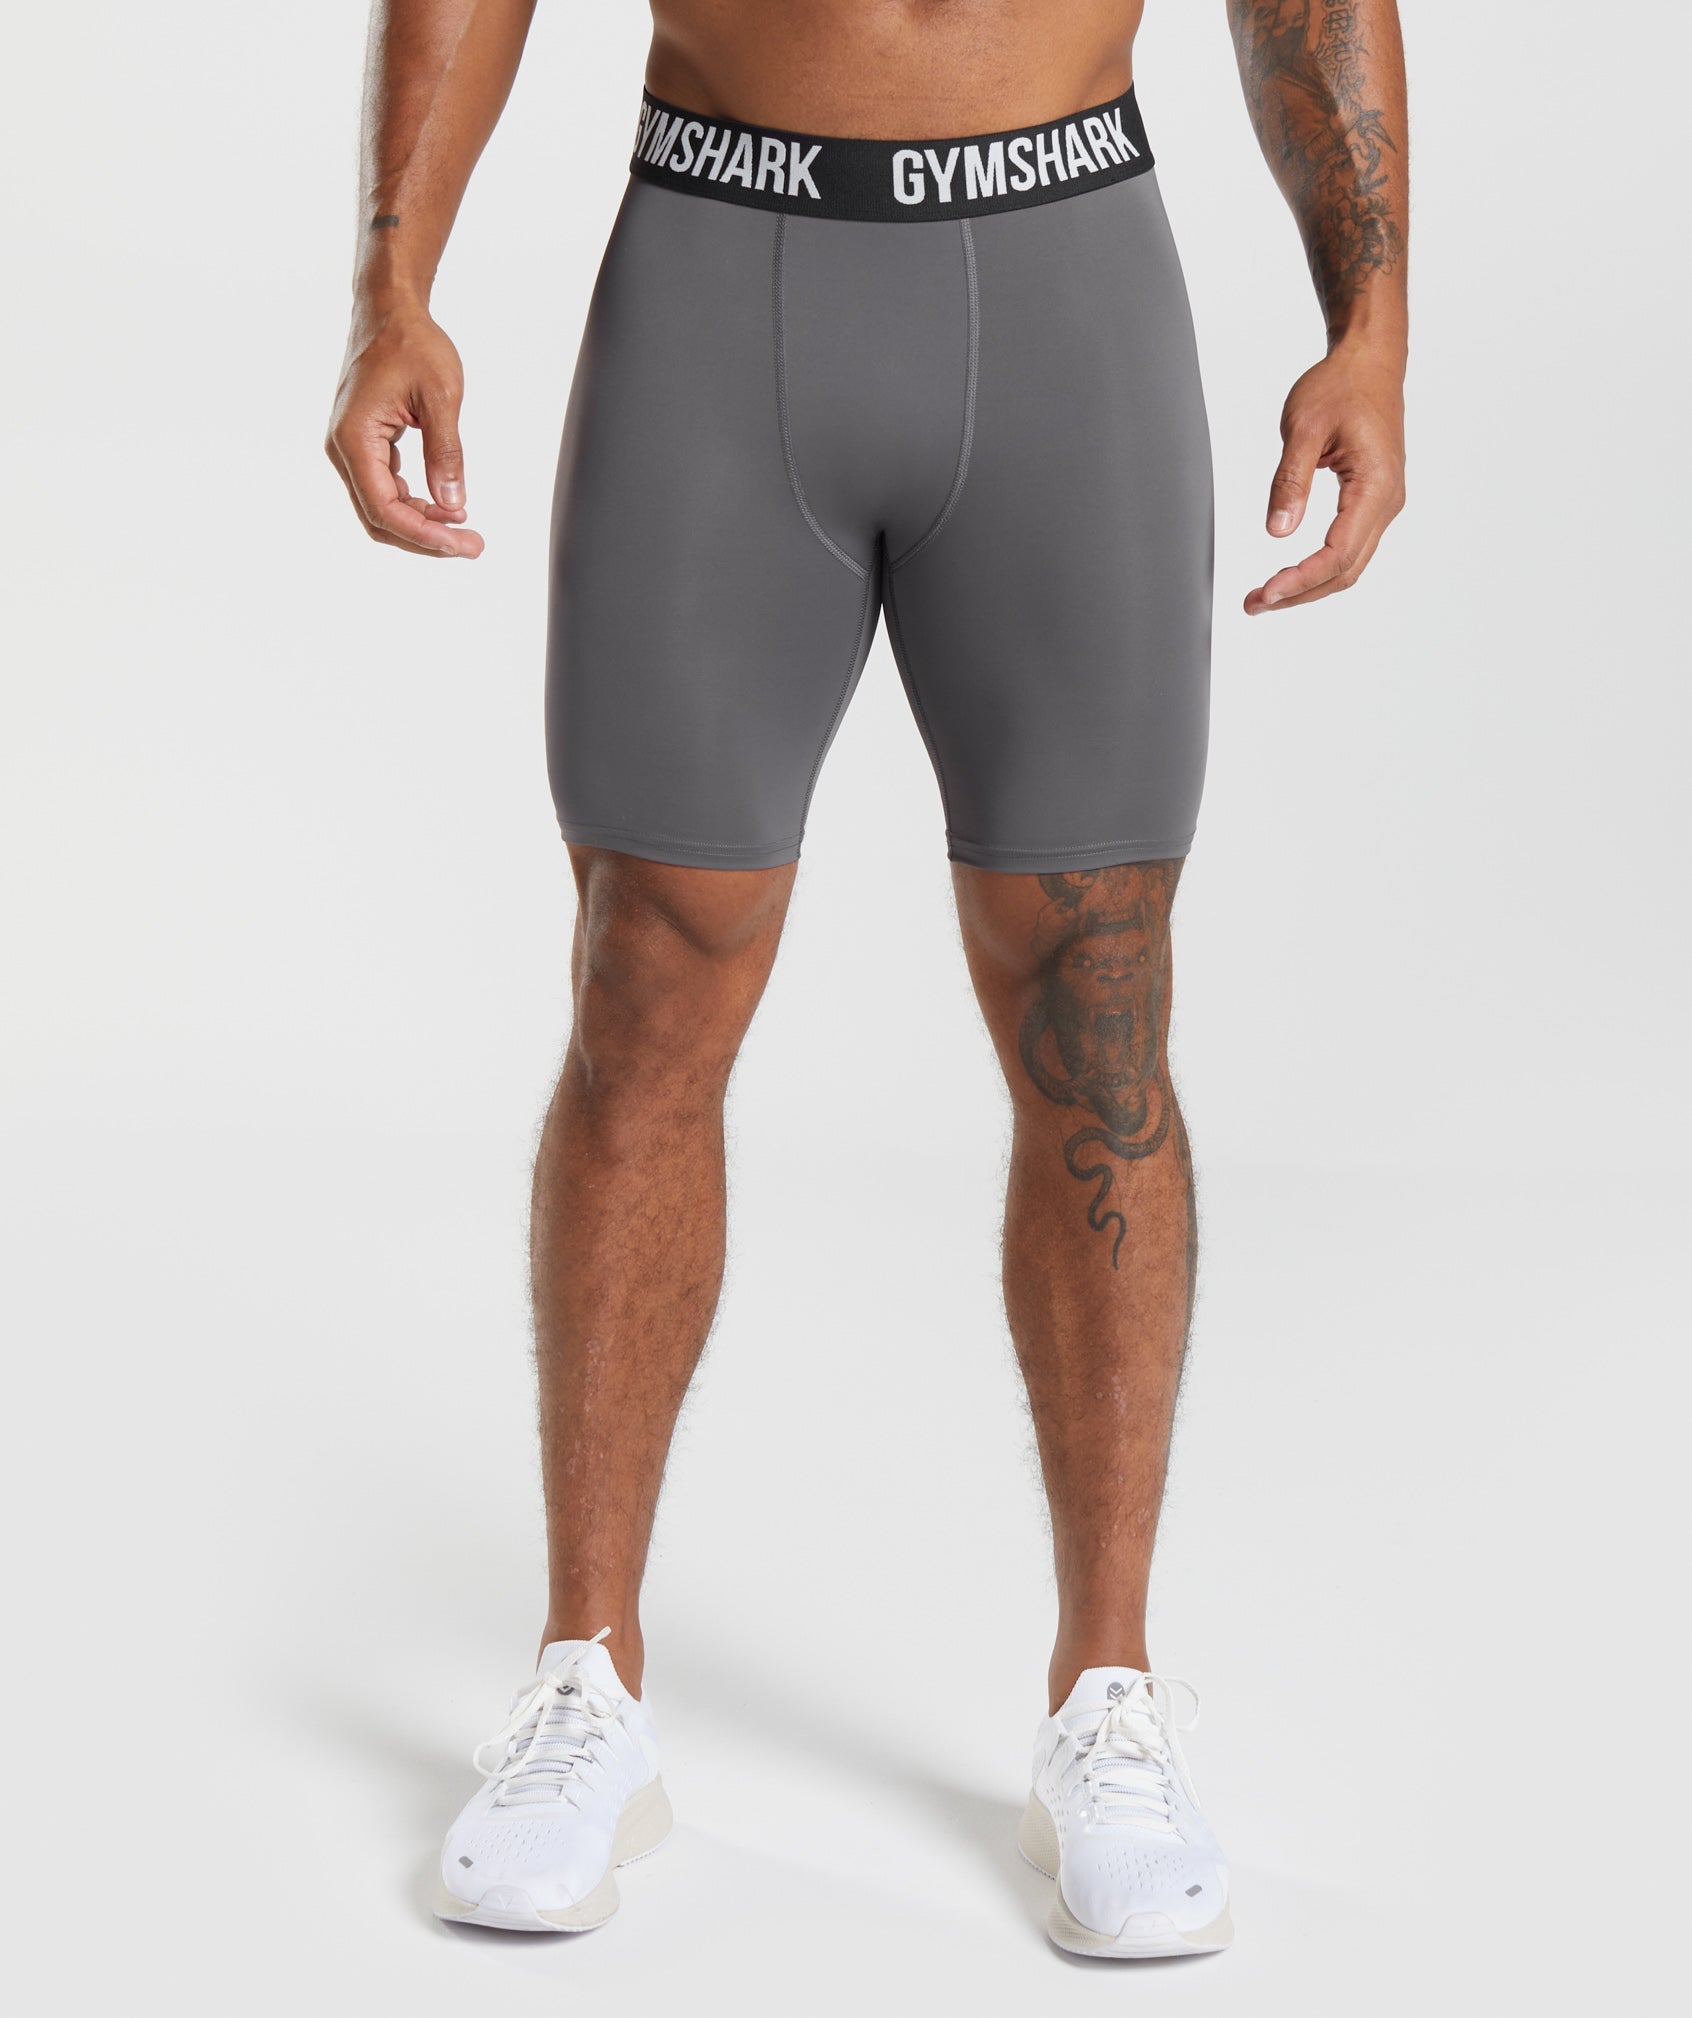 Men's Base Layers, Workout & Fitness Clothing